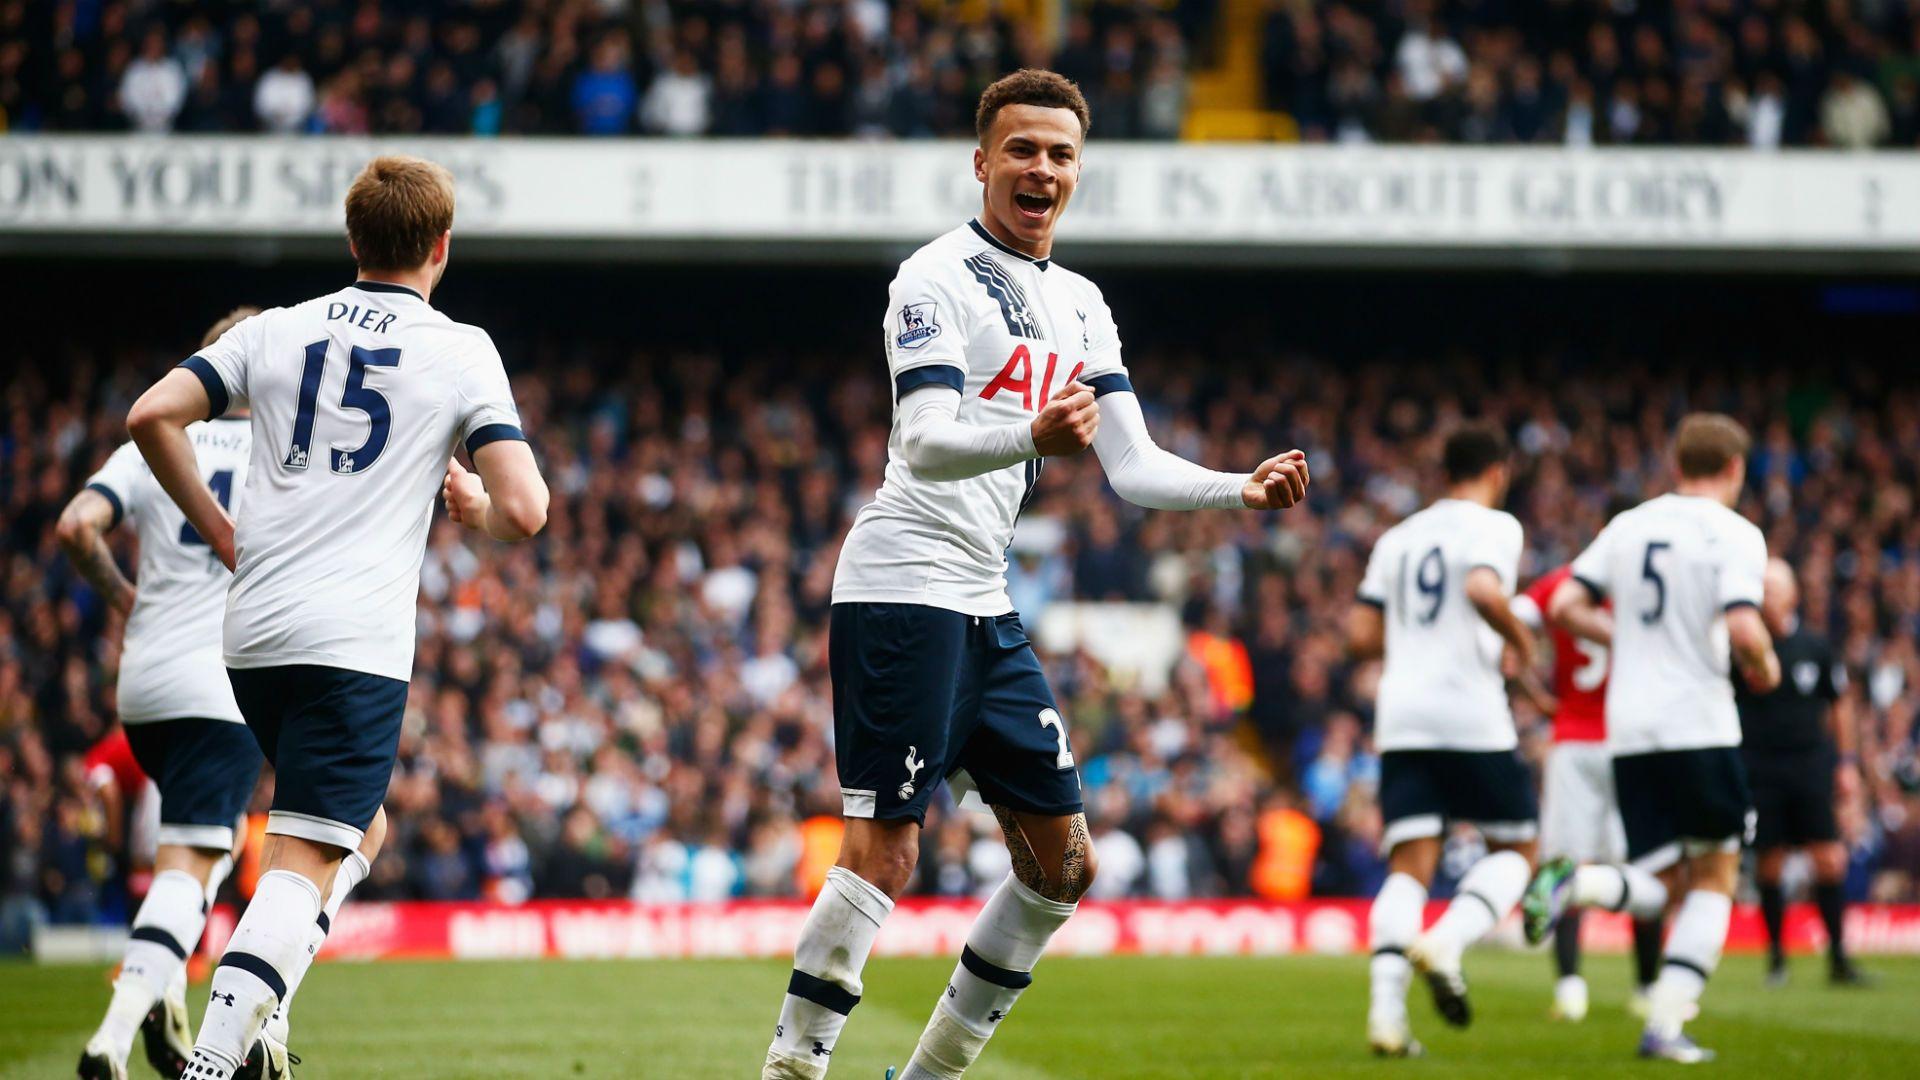 Paul Clement says Tottenham's Dele Alli would succeed at Real Madrid